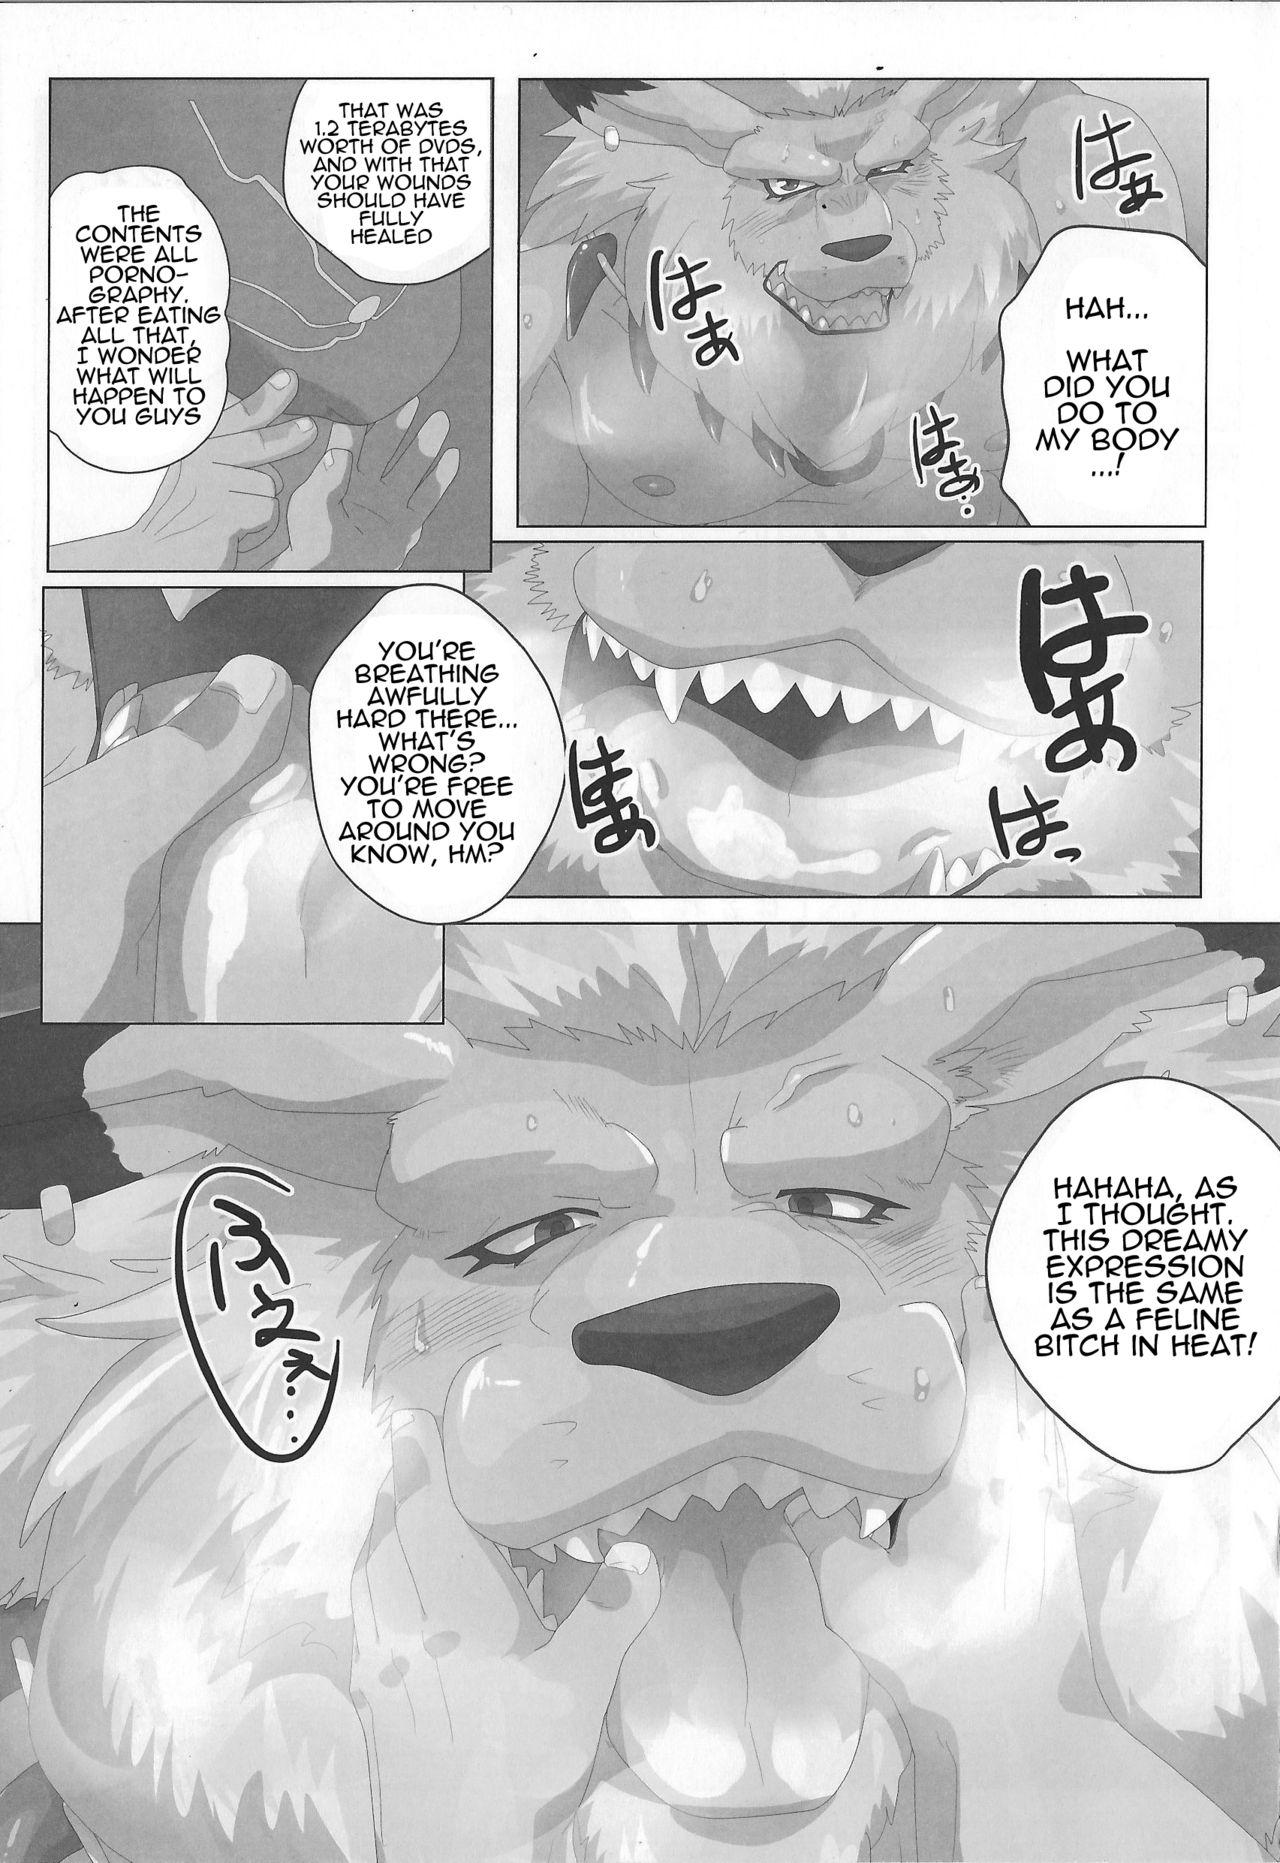 Teen Blowjob [Debirobu] For the Lion-Man Type Electric Life Form to Overturn Fate - Leomon Doujin [ENG] - Digimon Cousin - Page 9